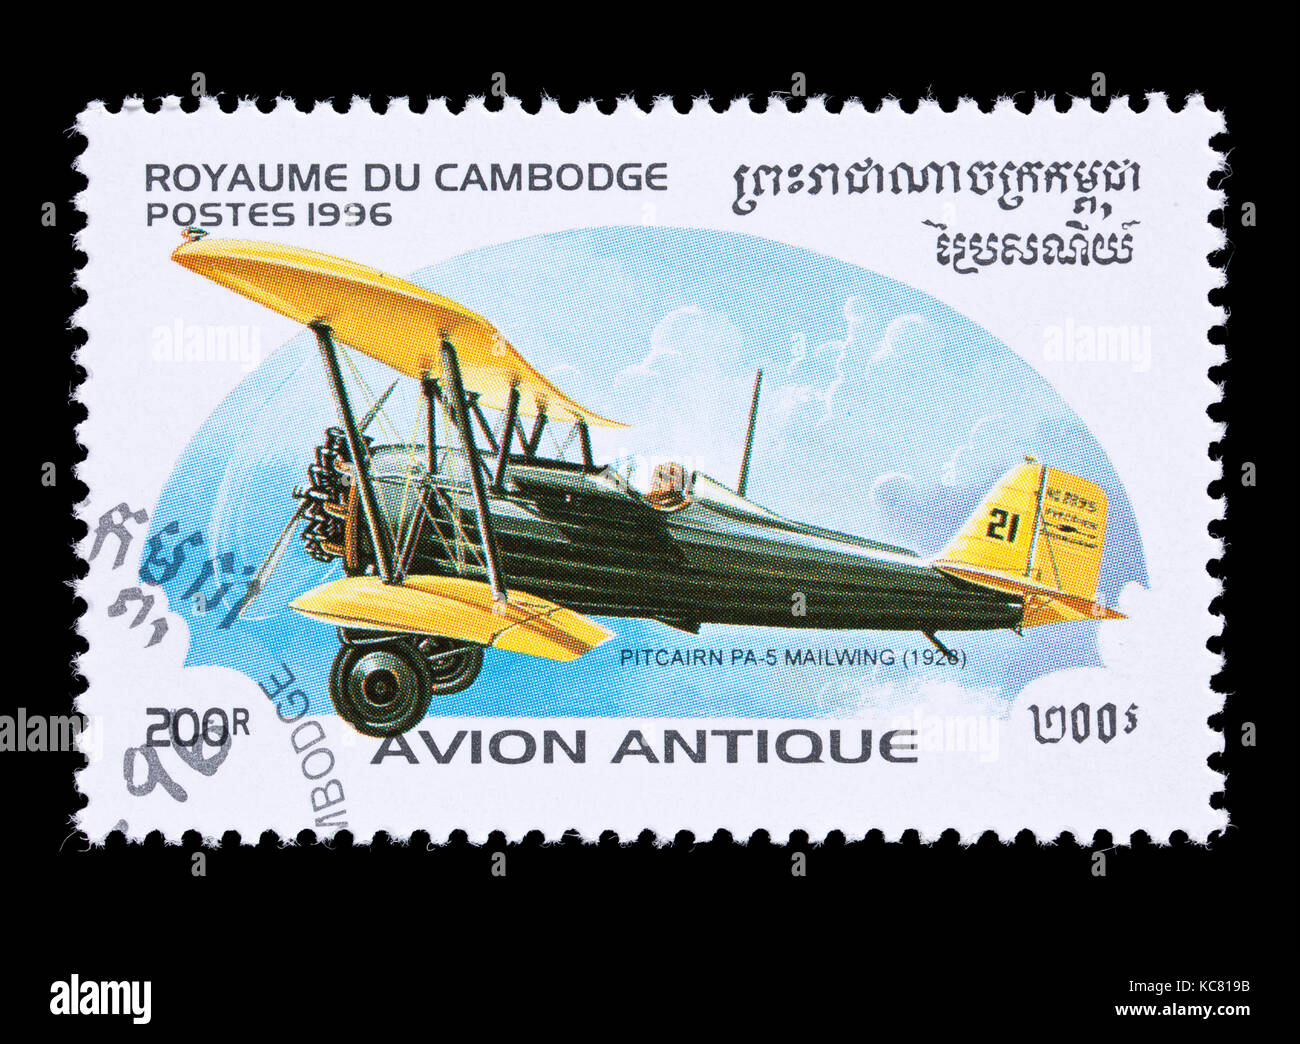 Postage stamp from Cambodia depicting a Pitcairn PA-5 mailwing biplane from 1926. Stock Photo